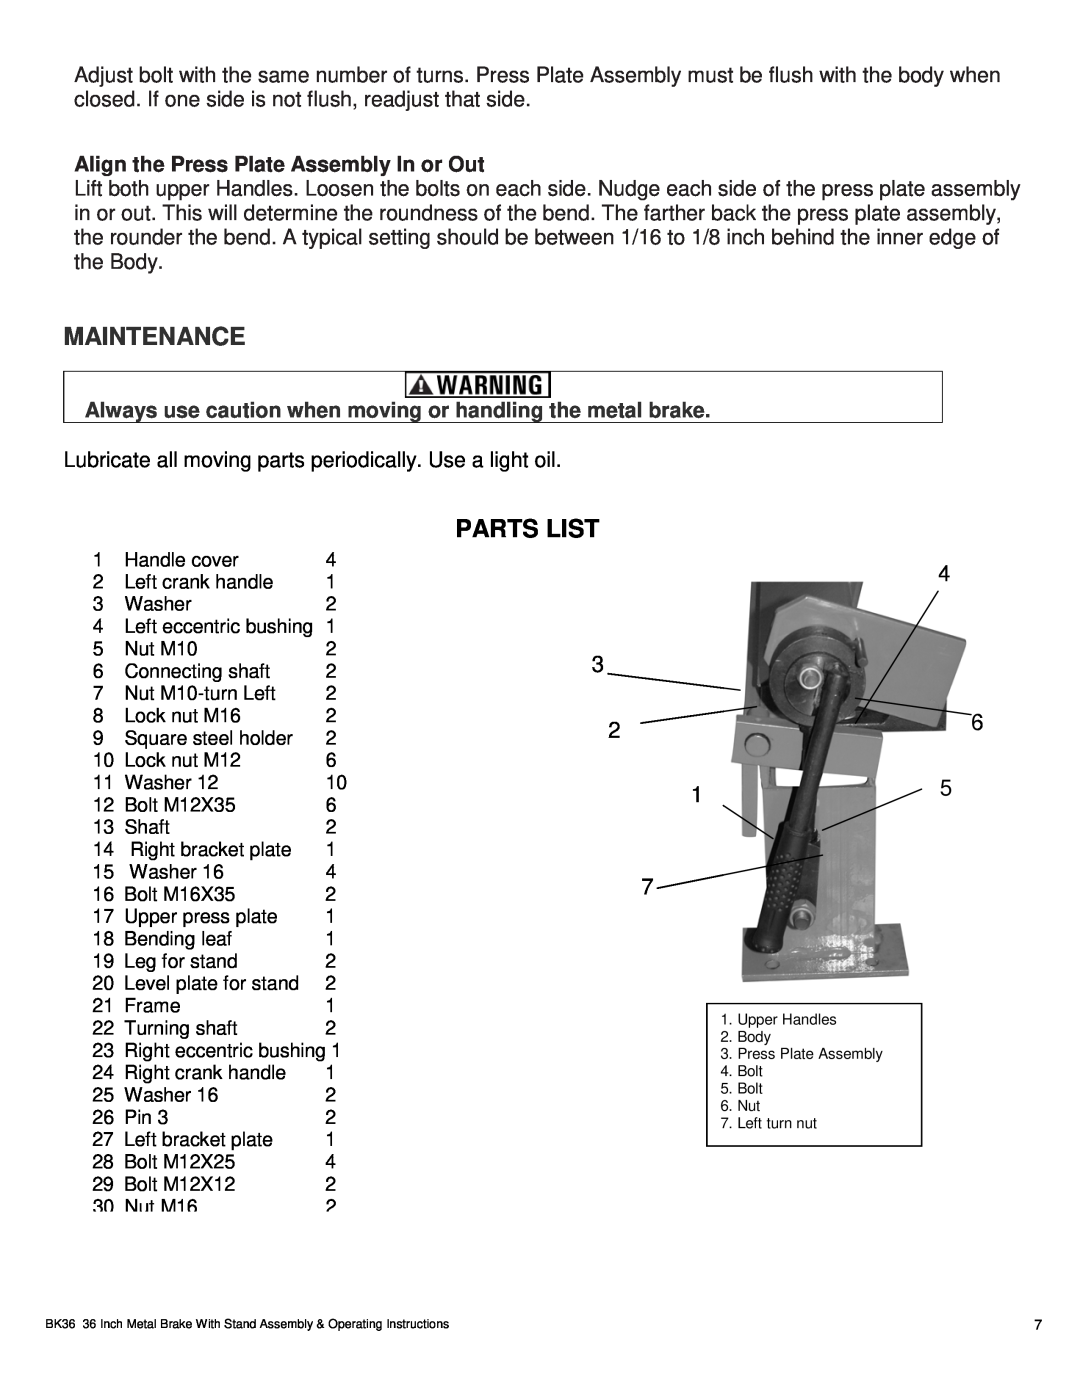 Buffalo Tools BK36 operating instructions Maintenance, Parts List, Align the Press Plate Assembly In or Out 